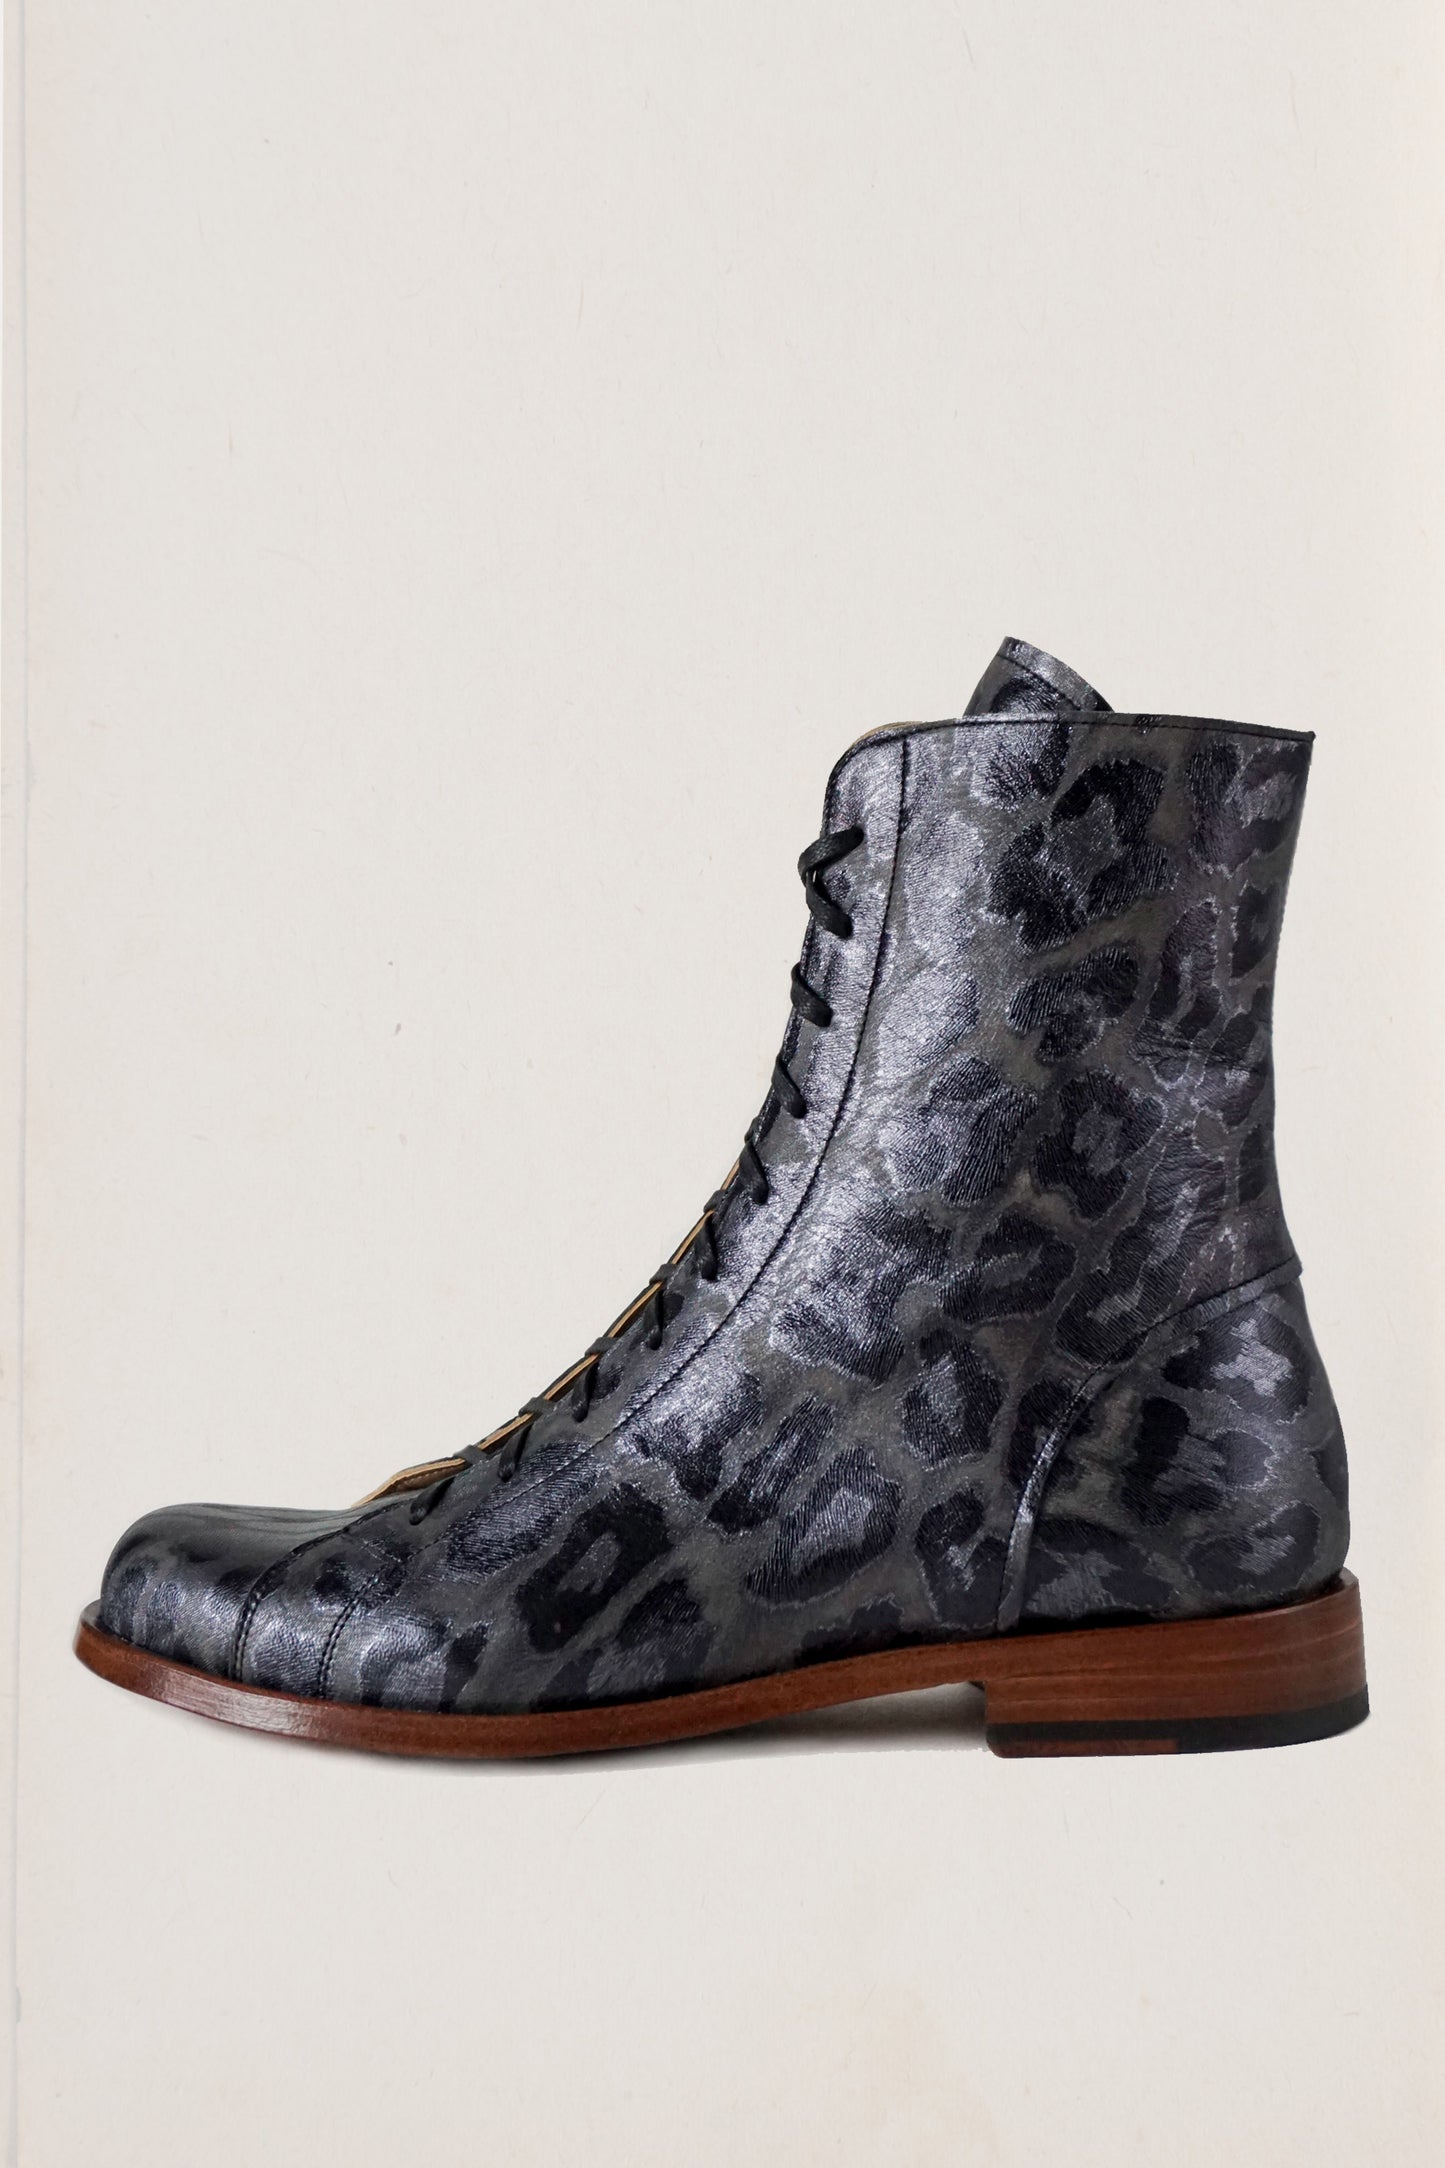 MADE to ORDER - JACKDAW BOOT